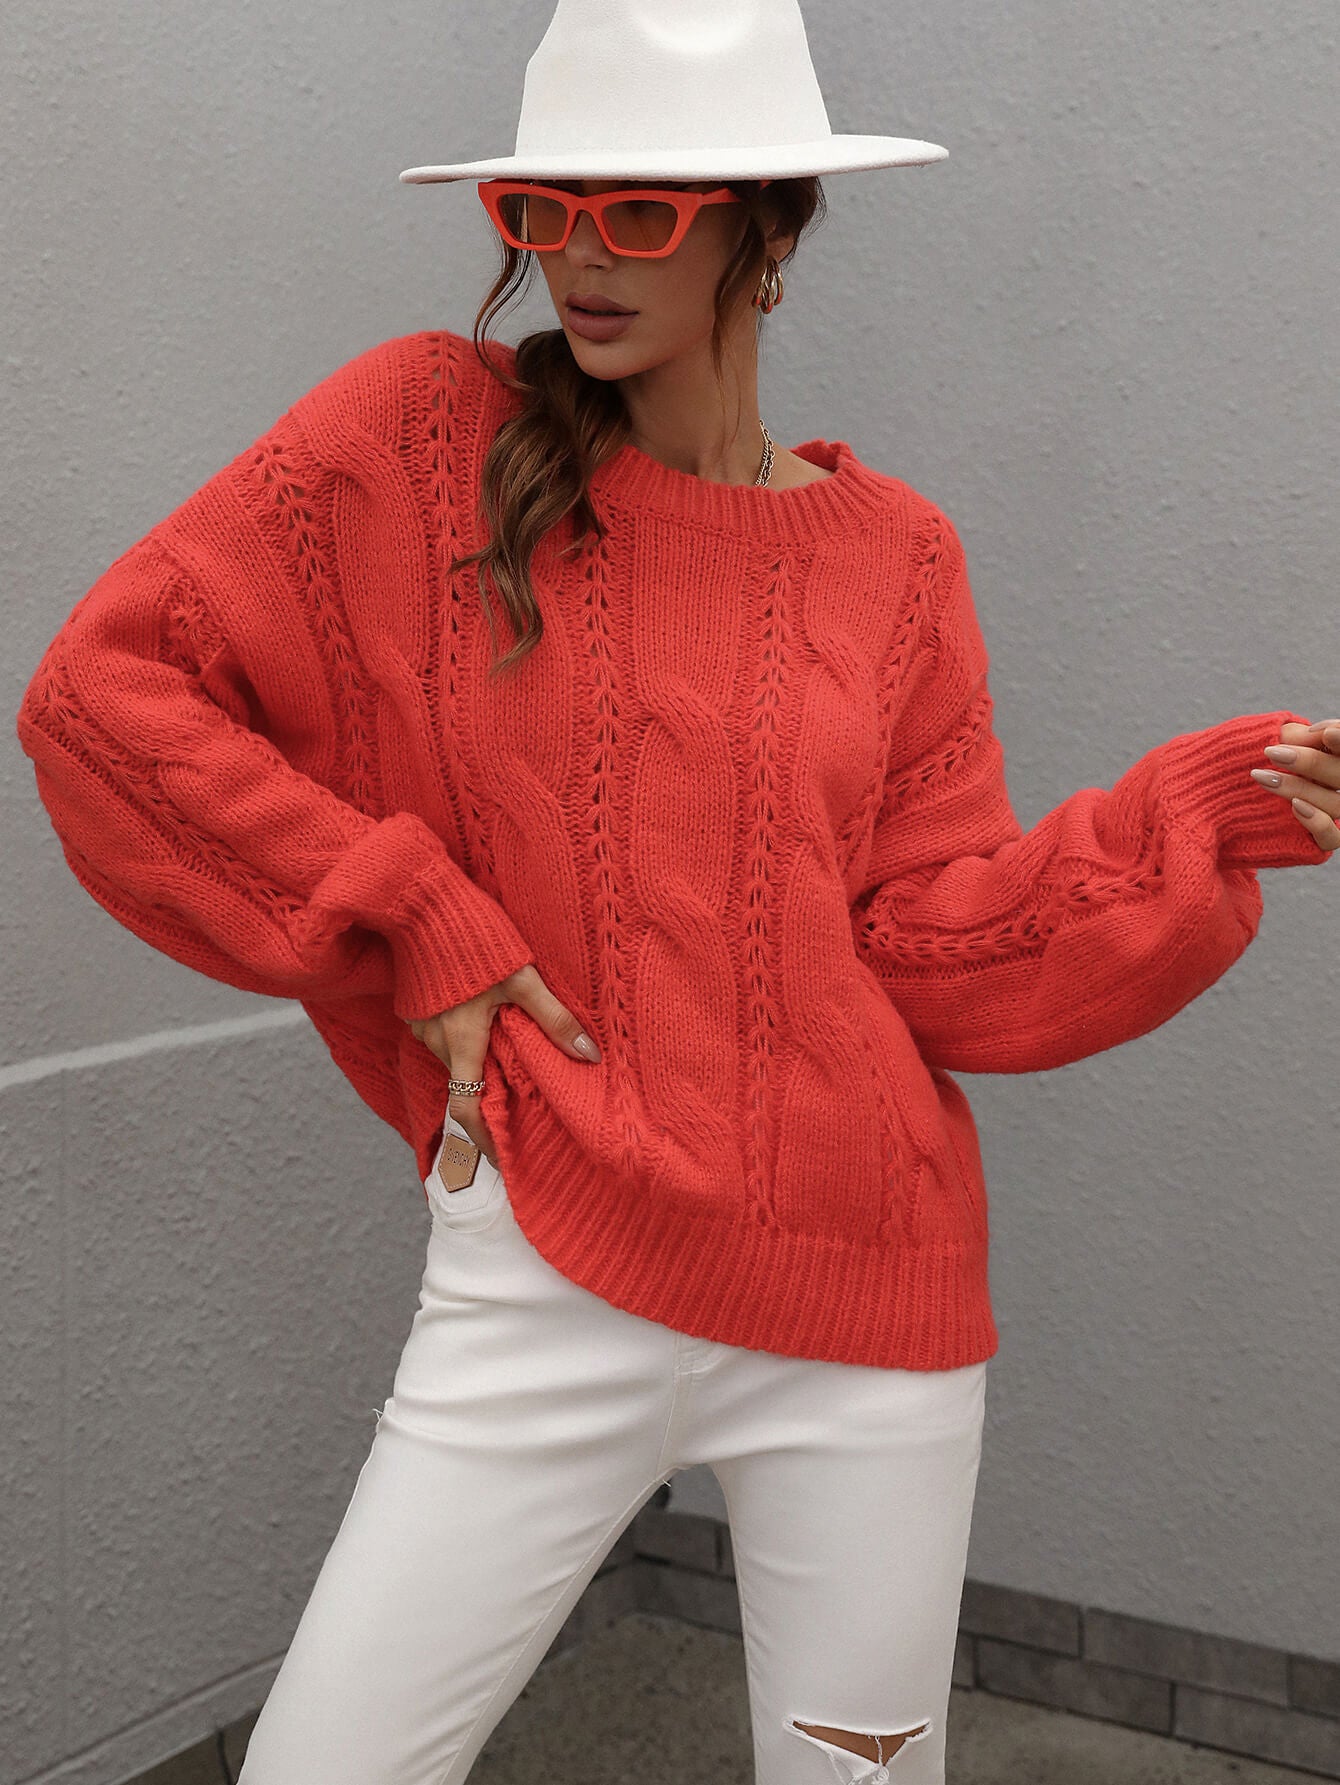 Cable-Knit Openwork Round Neck Sweater